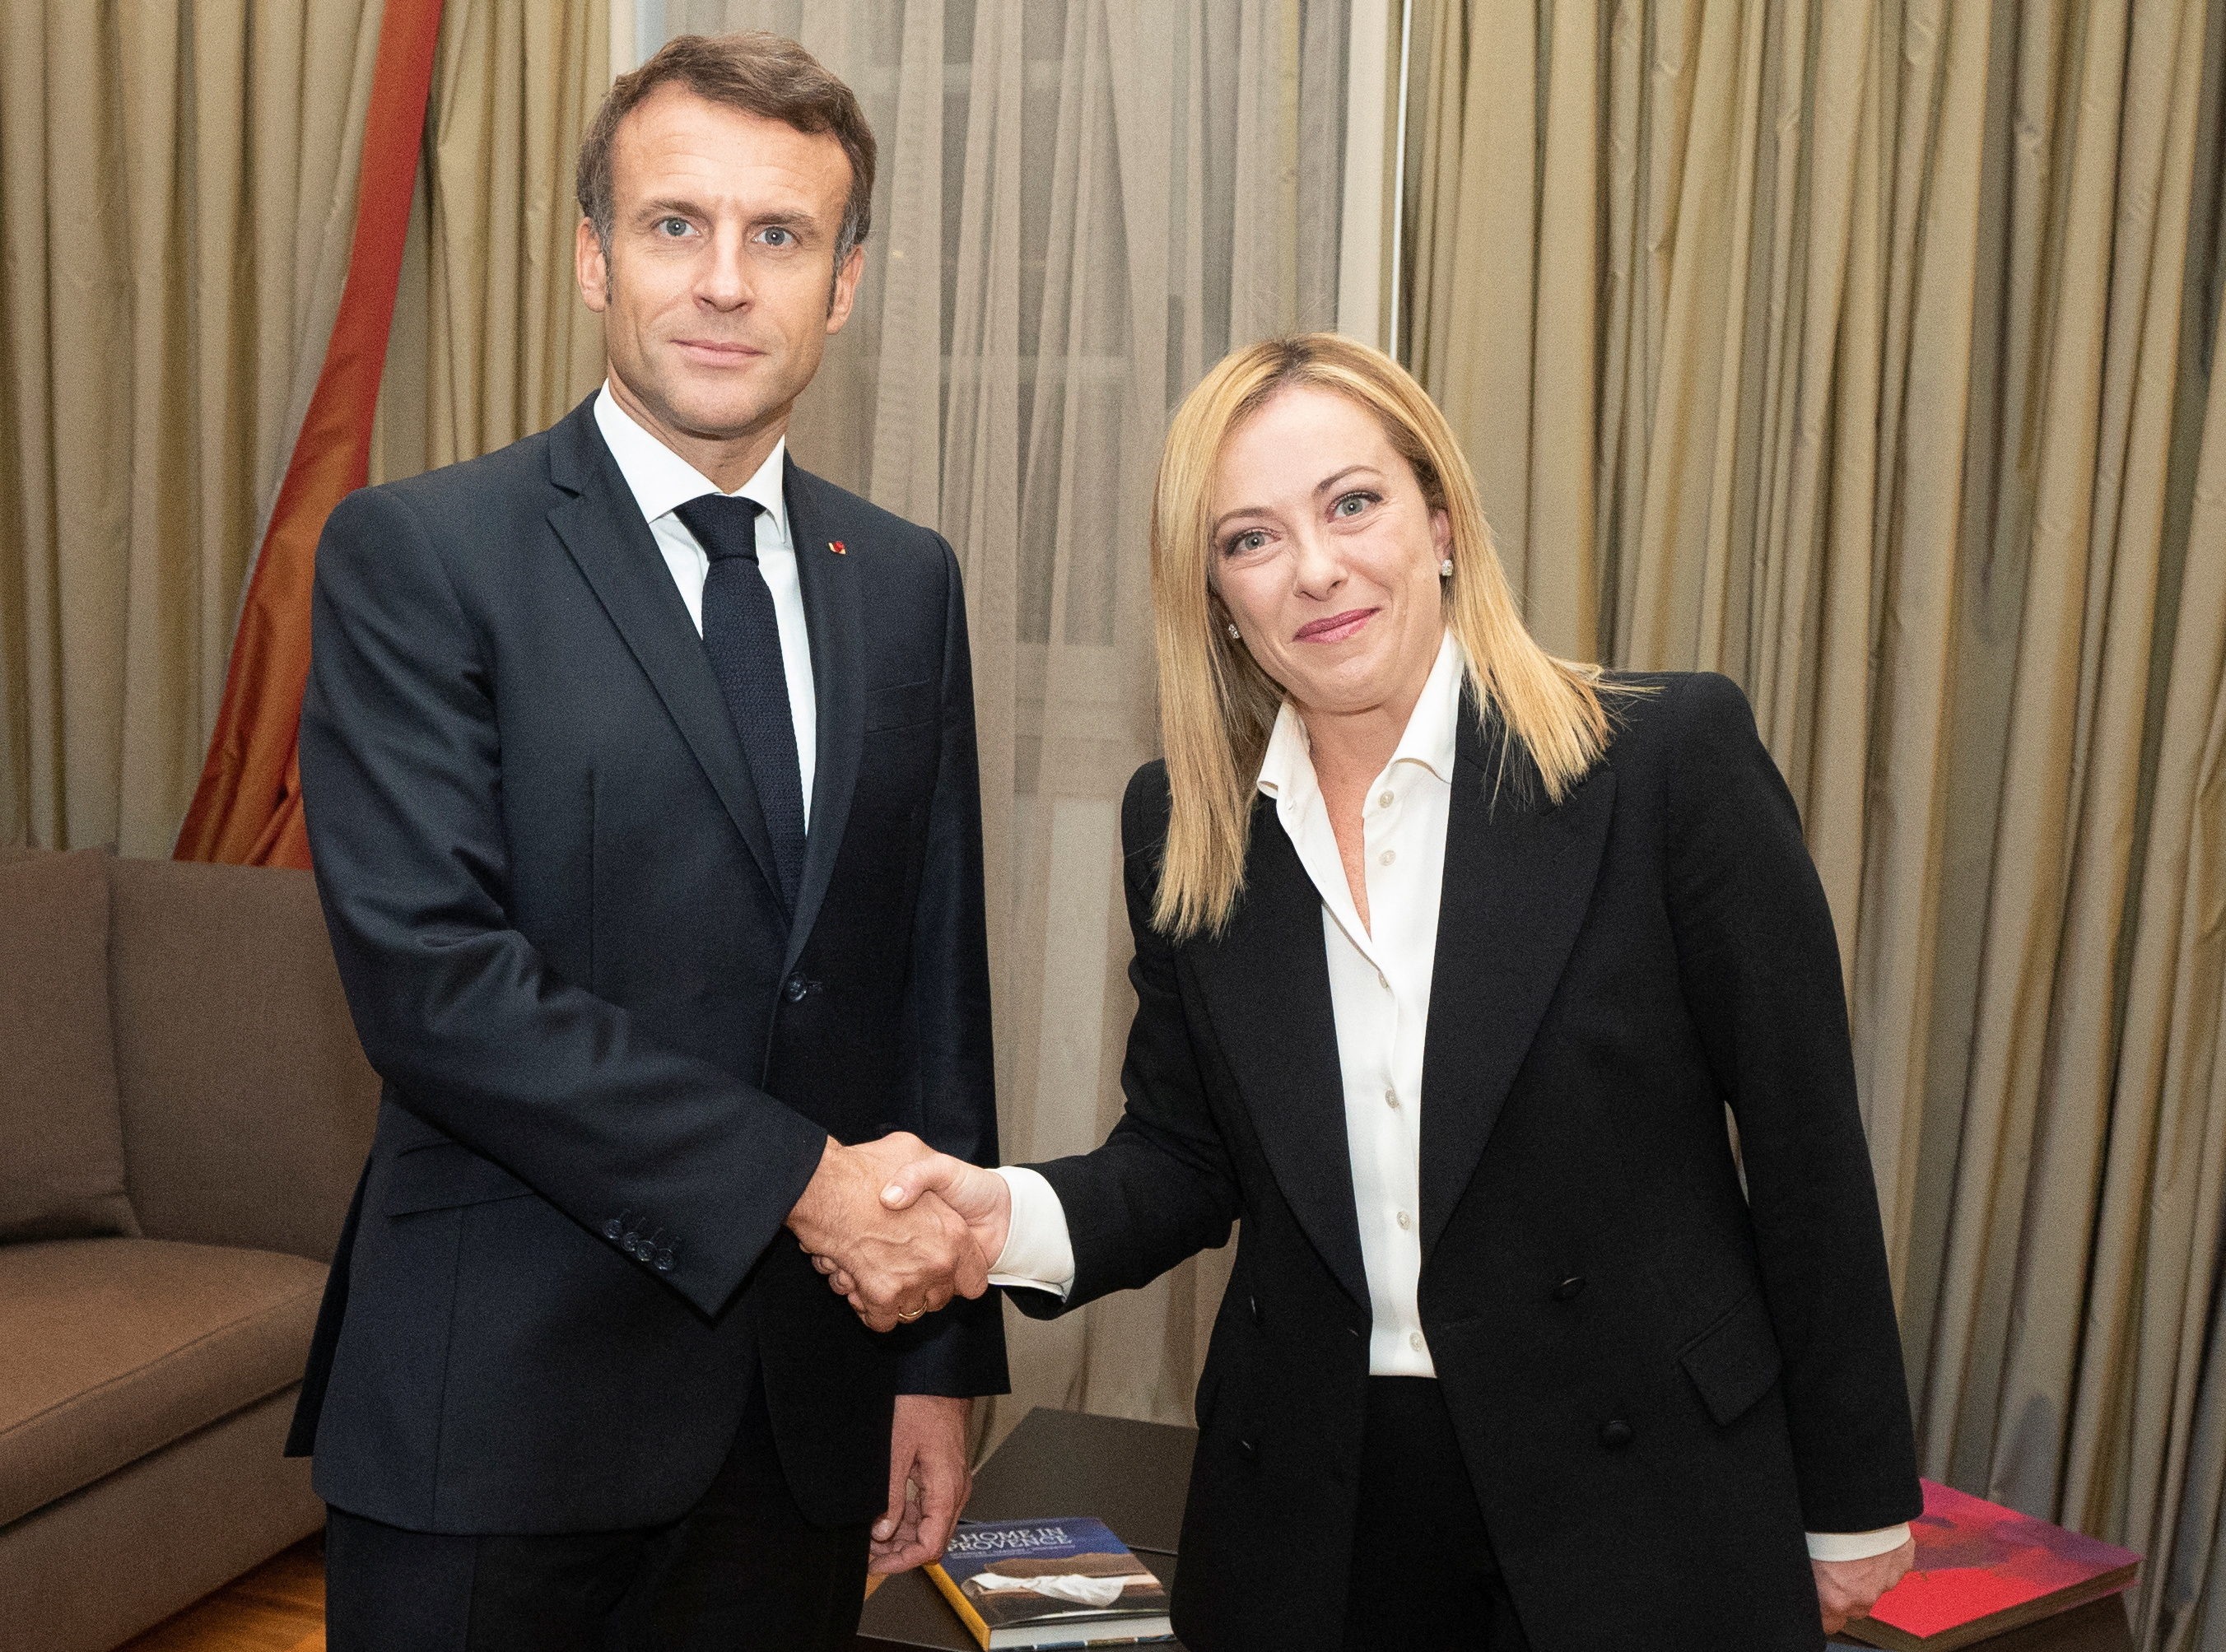 Italian Prime Minister Giorgia Meloni shakes hands with French President Emmanuel Macron during a meeting in Rome